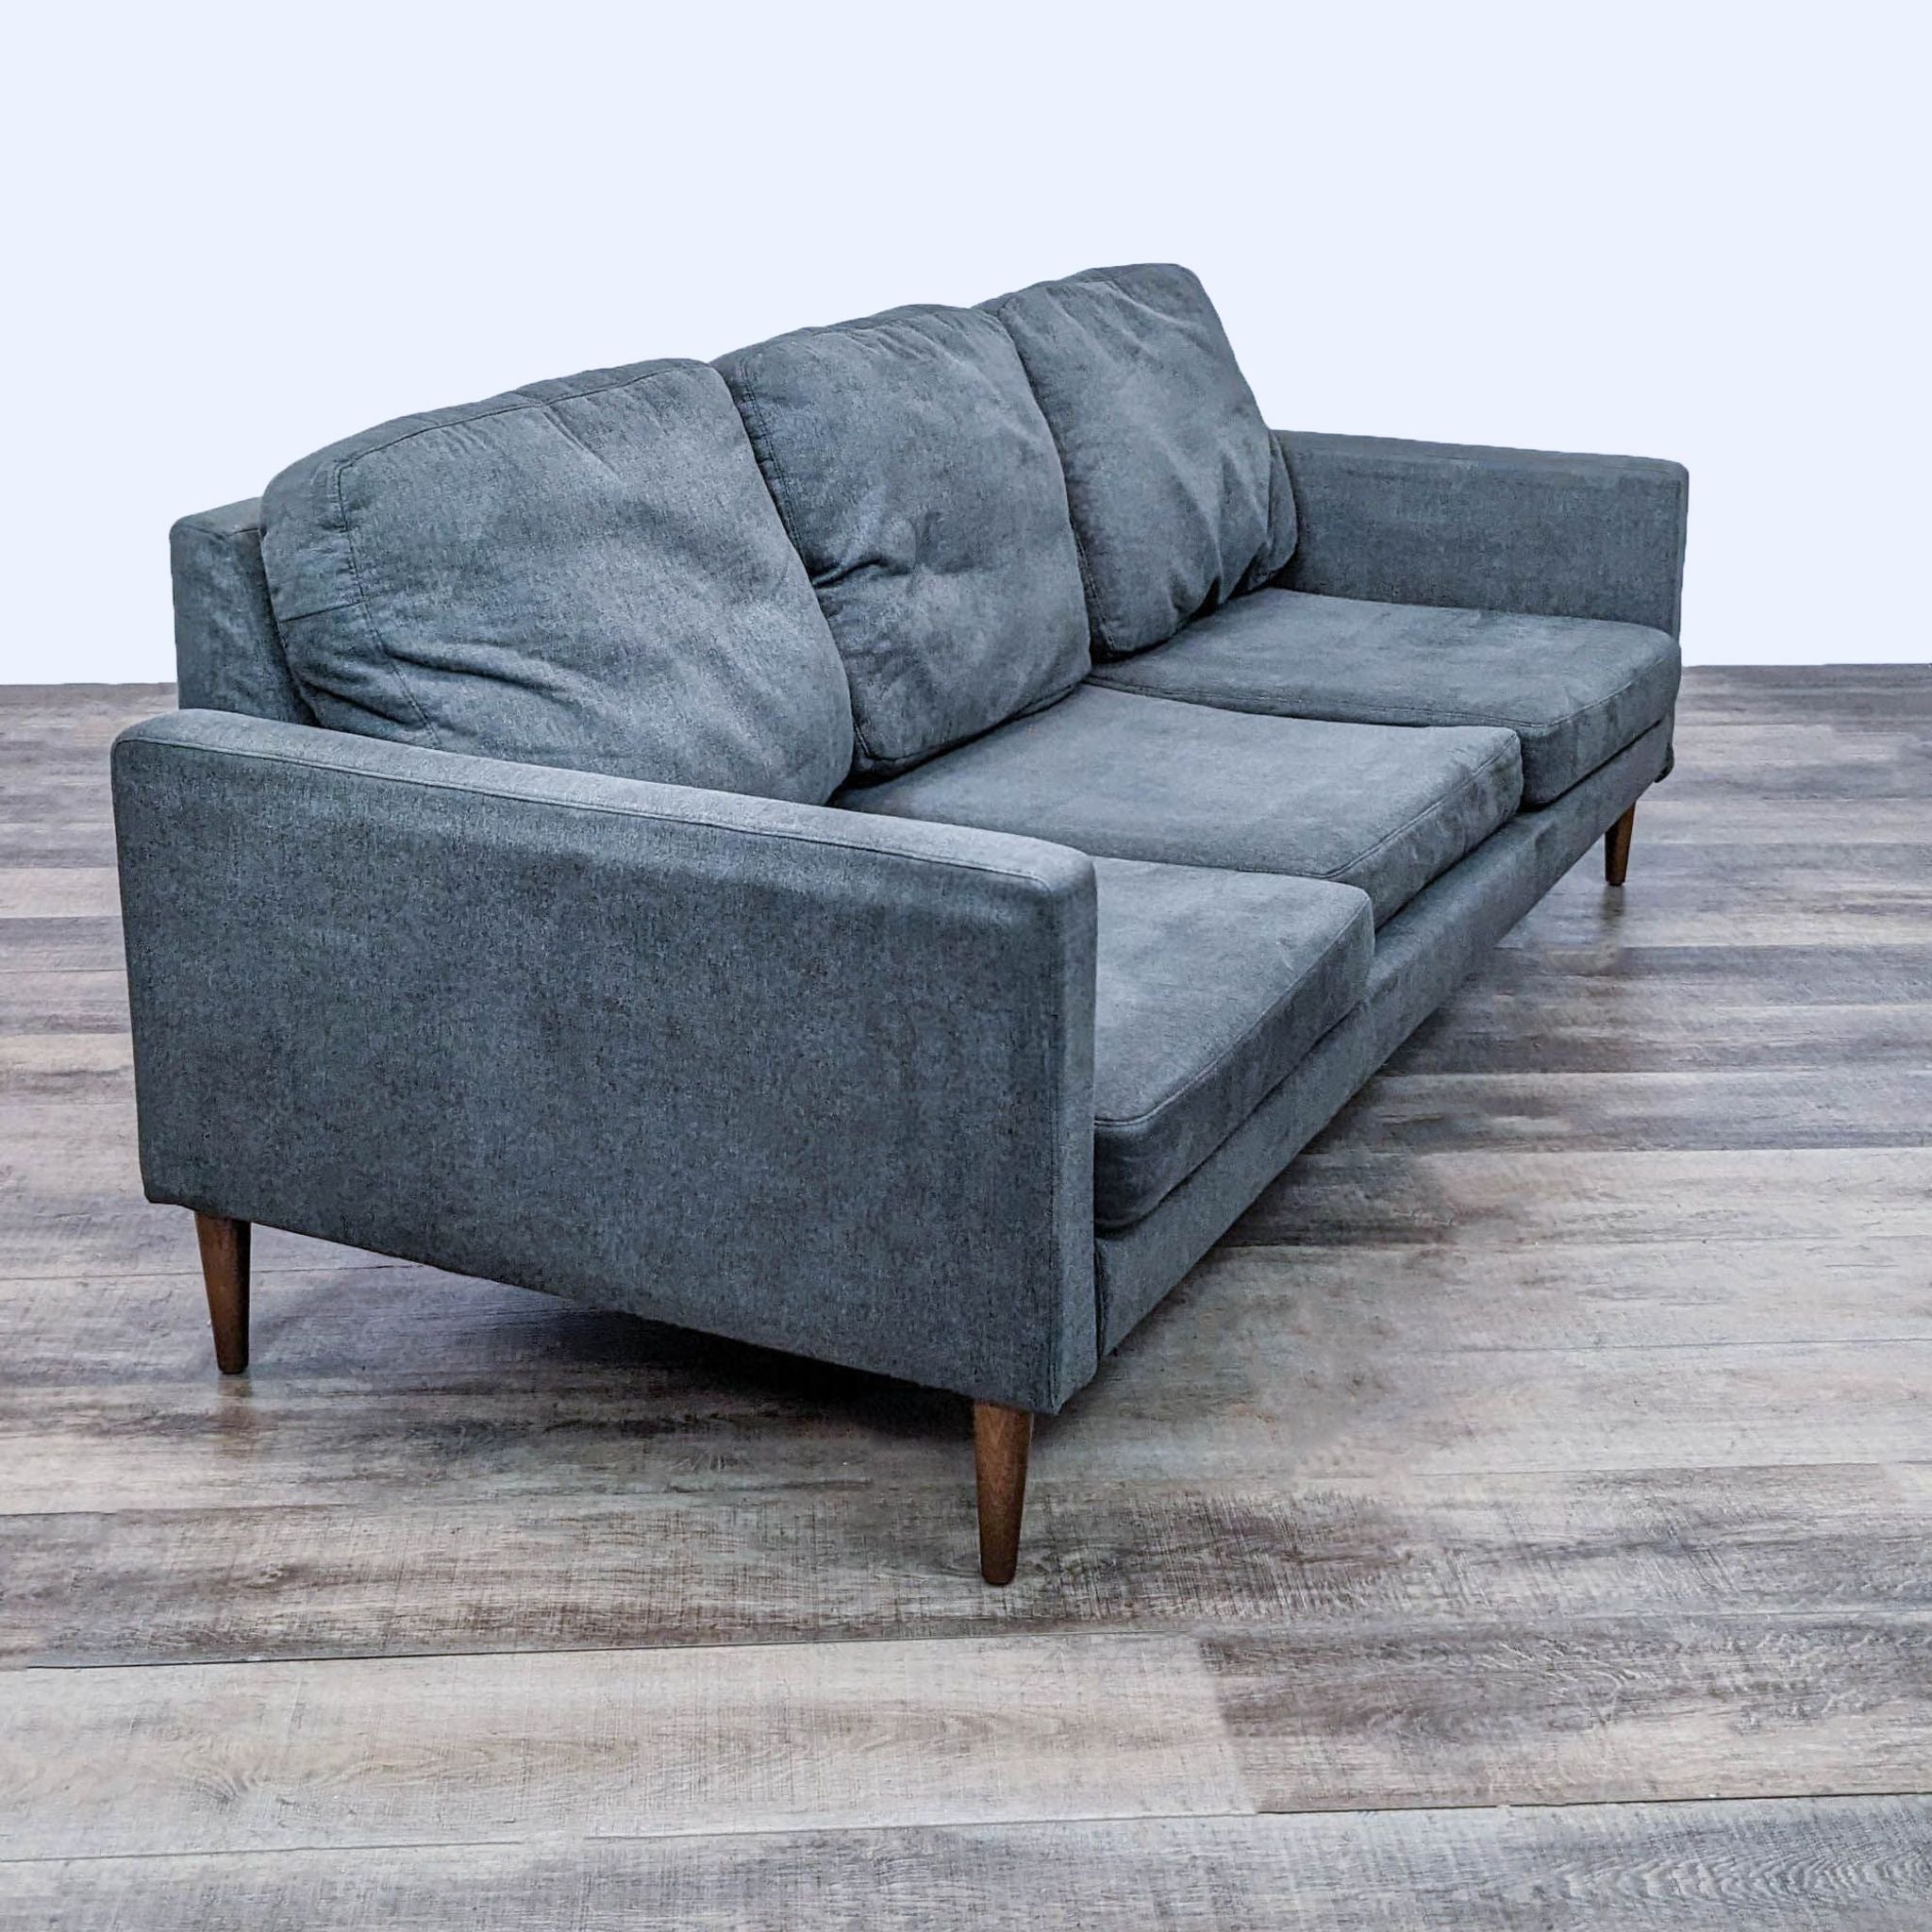 2. Side angle view of a modern Reperch 3-seat gray sofa showing its sleek lines and tapered wooden feet on a wooden floor.